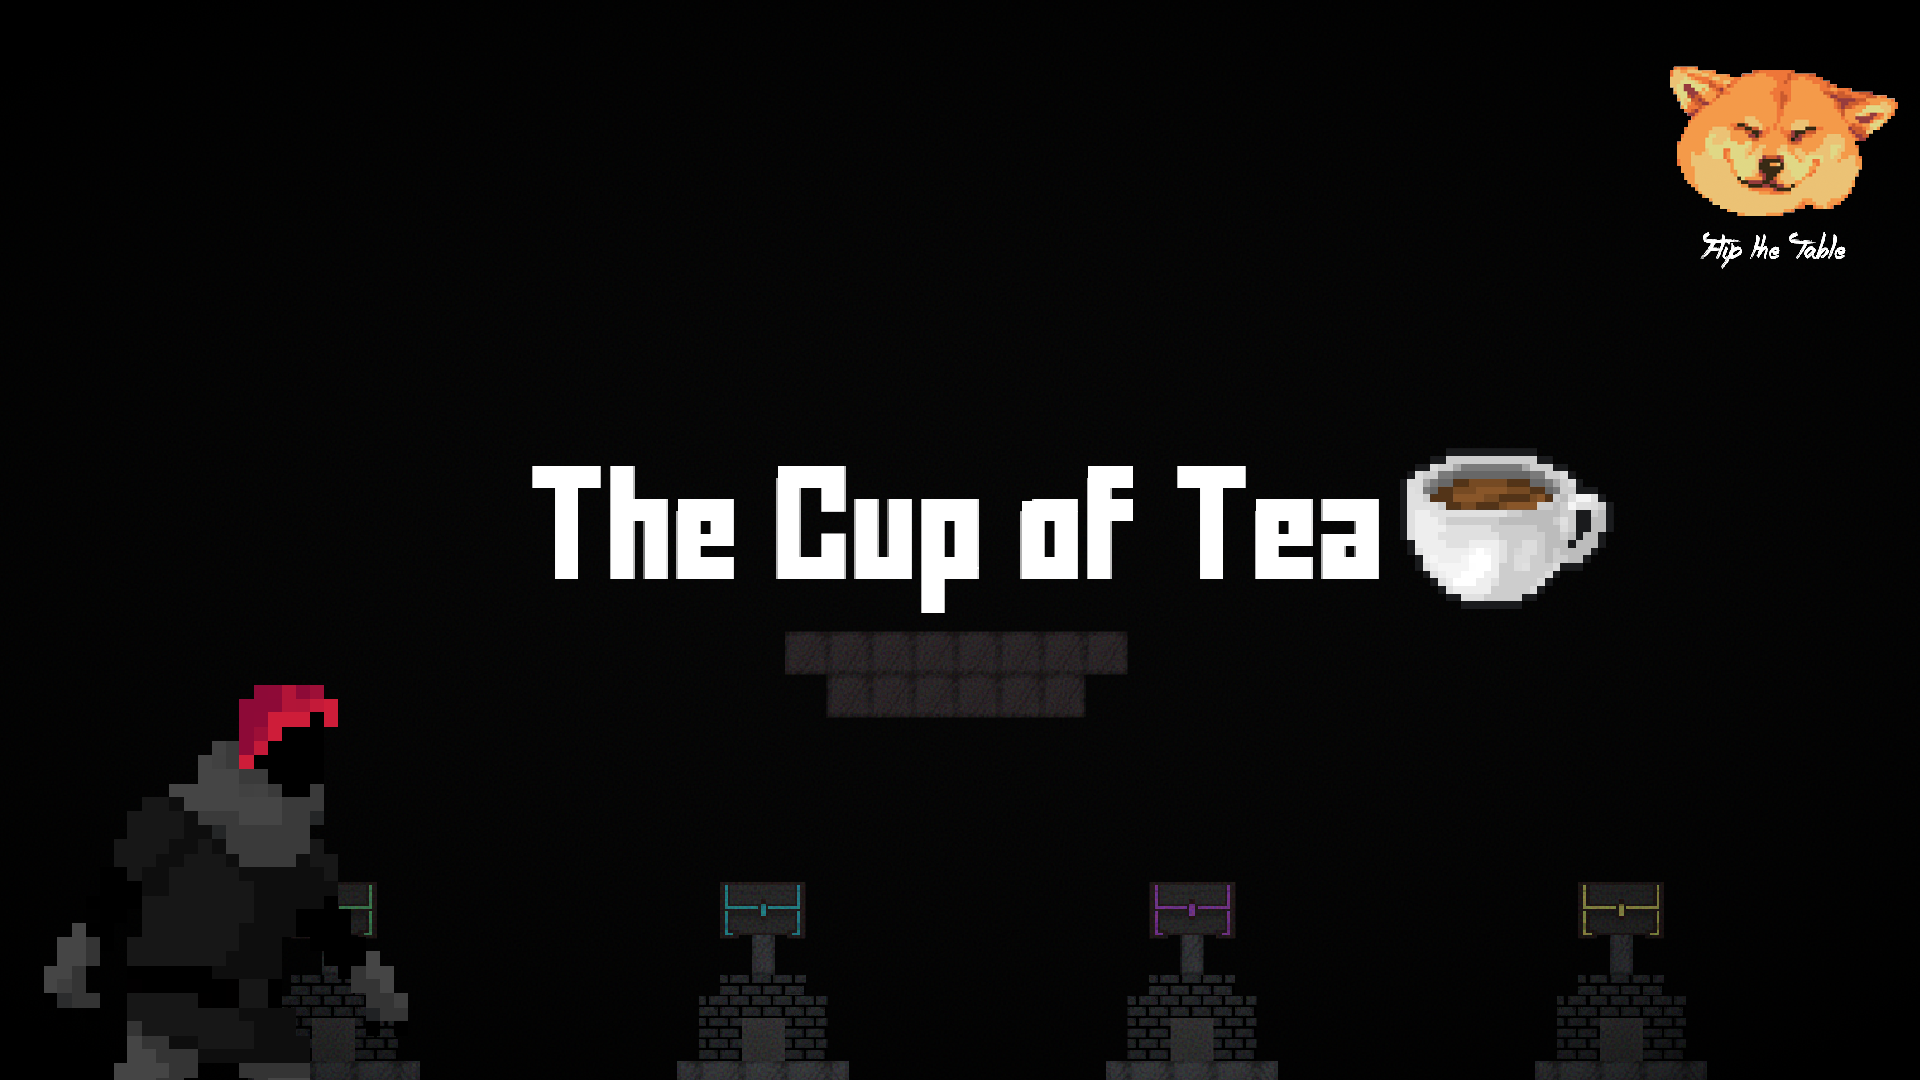 The Cup of Tea